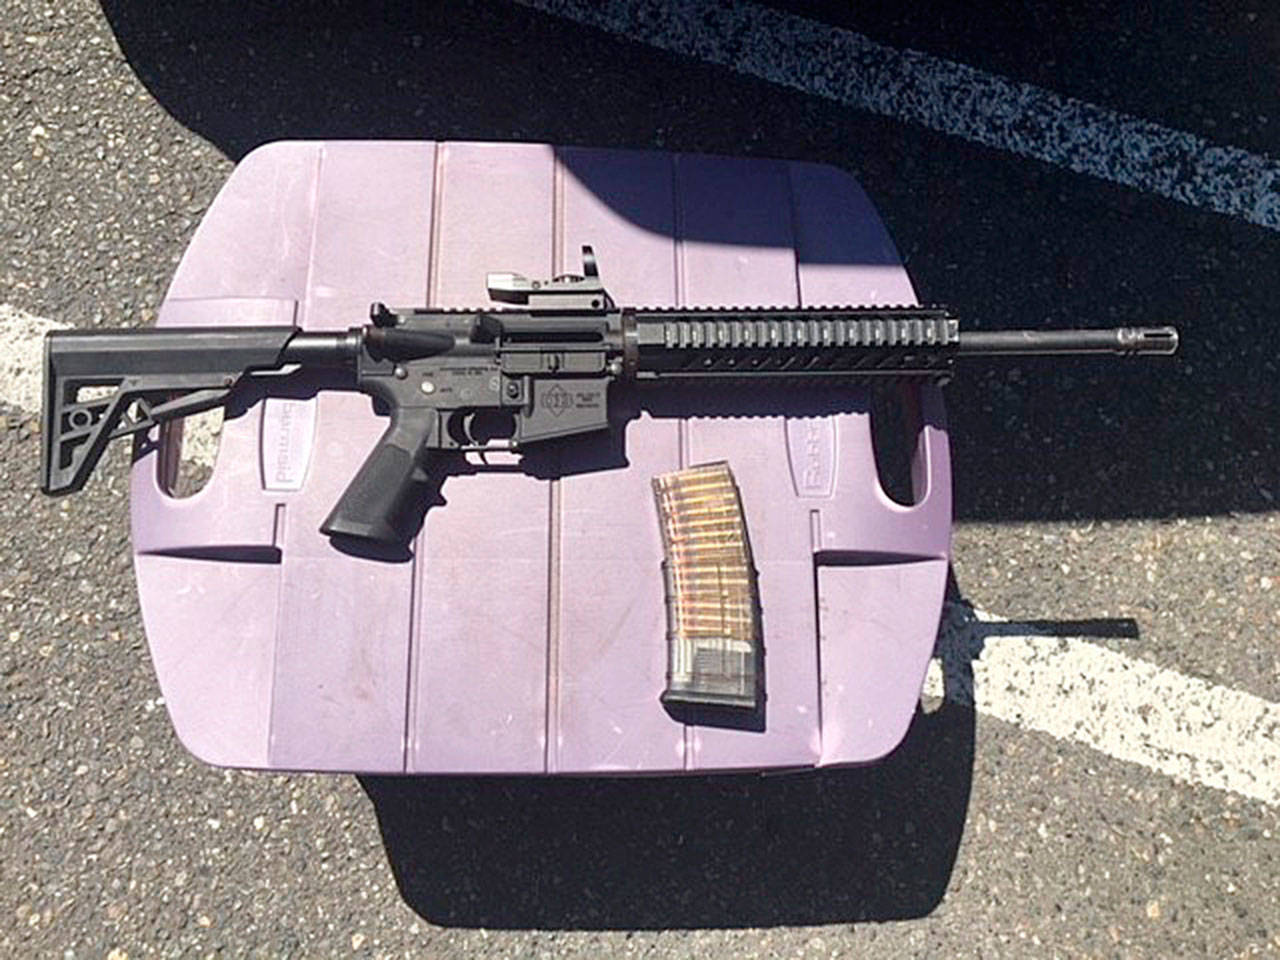 The AR-15 rifle the suspect had in his possession at the time of the shooting at the Kent Station parking garage. Also in the photograph is the loaded magazine that was inserted into the rifle at the time of the shooting. COURTESY PHOTO, King County Sheriff’s Office